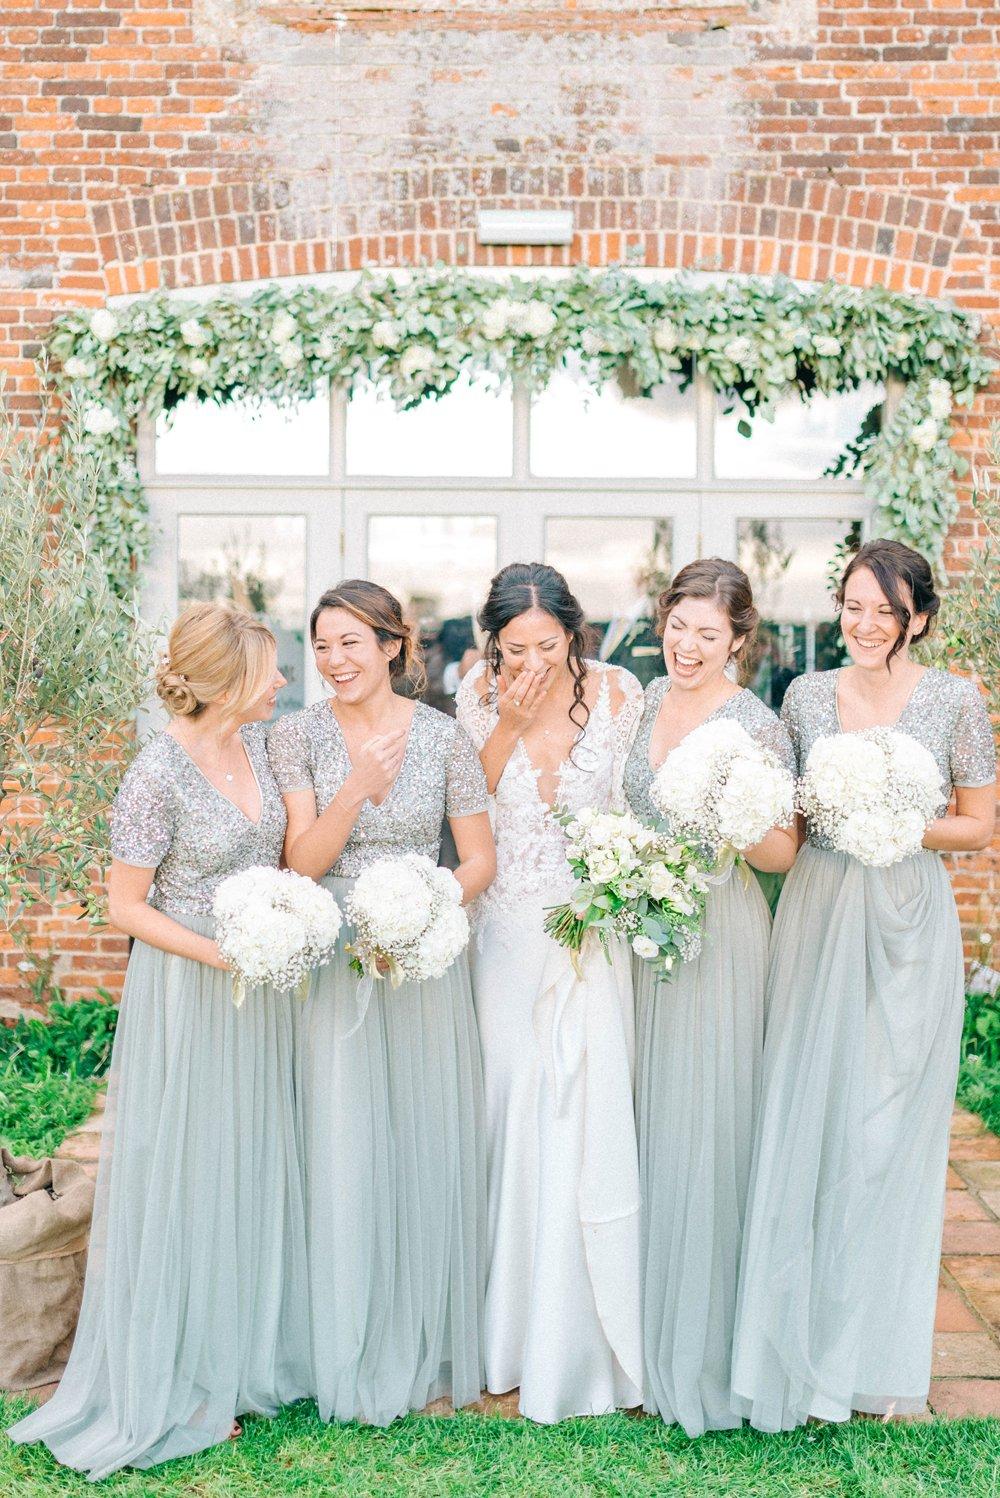 69 of the Prettiest Spring Wedding Ideas for 2021 -  